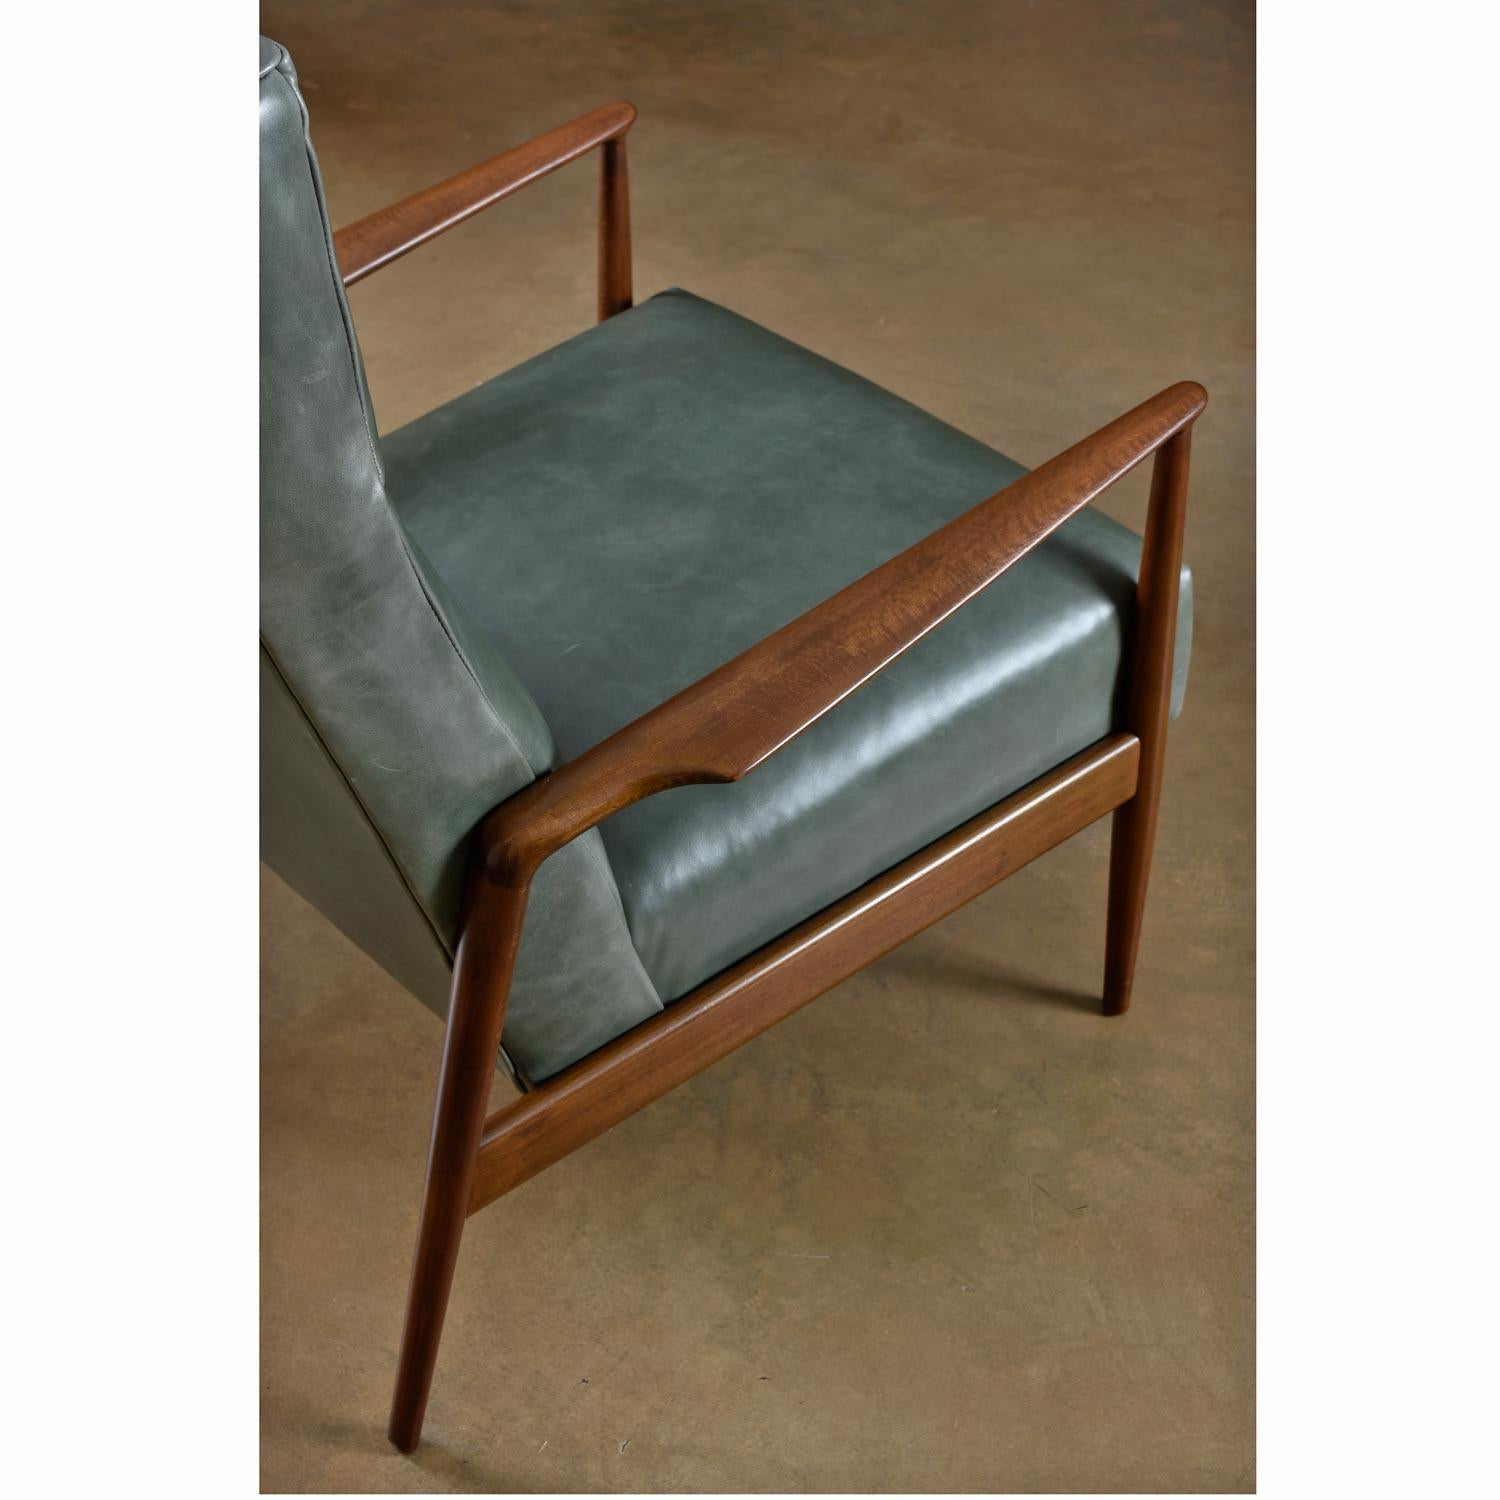 Danish Highback Green Leather Ib Kofod-Larsen Sculpted Blade Arm Lounge Chair for Selig